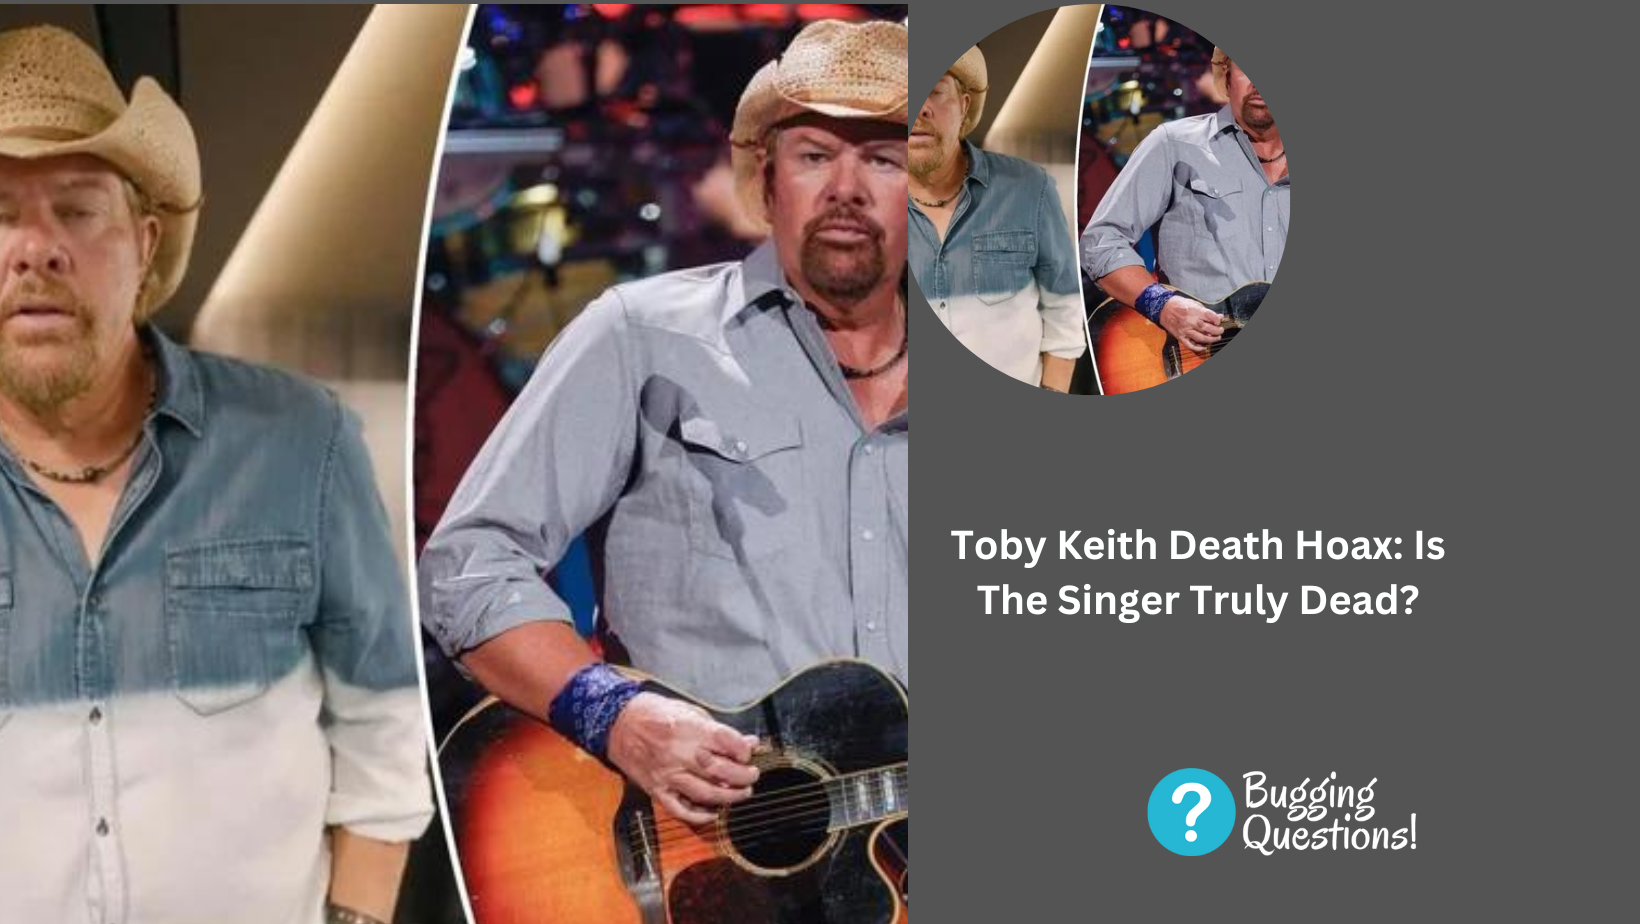 Toby Keith Death Hoax: Is The Singer Truly Dead?